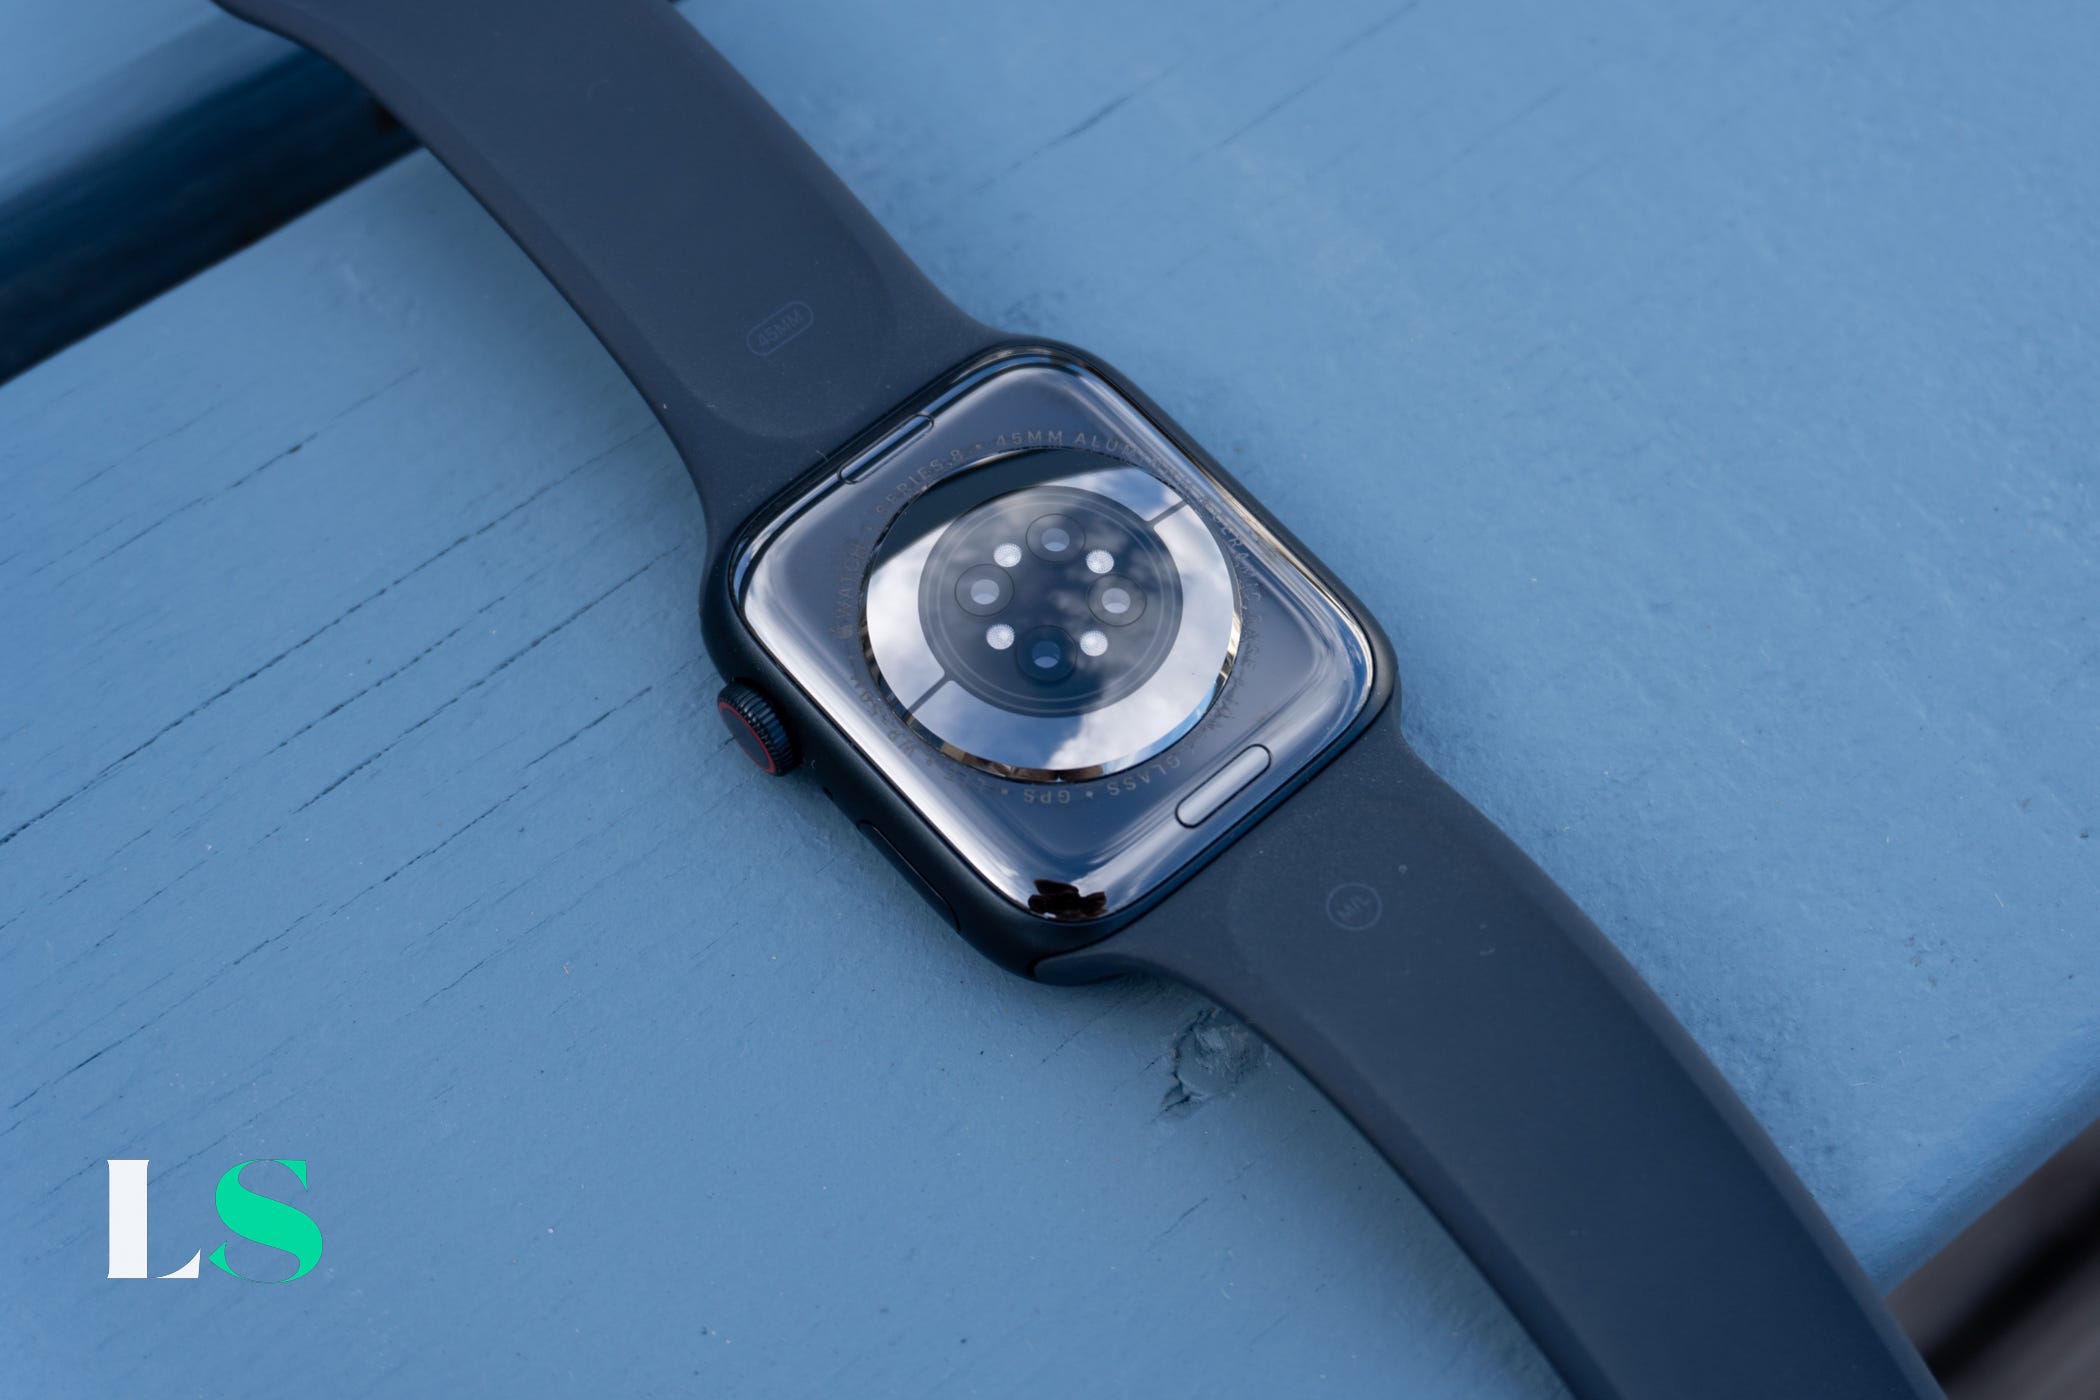 Apple Watch X reportedly coming next year with blood pressure tracking